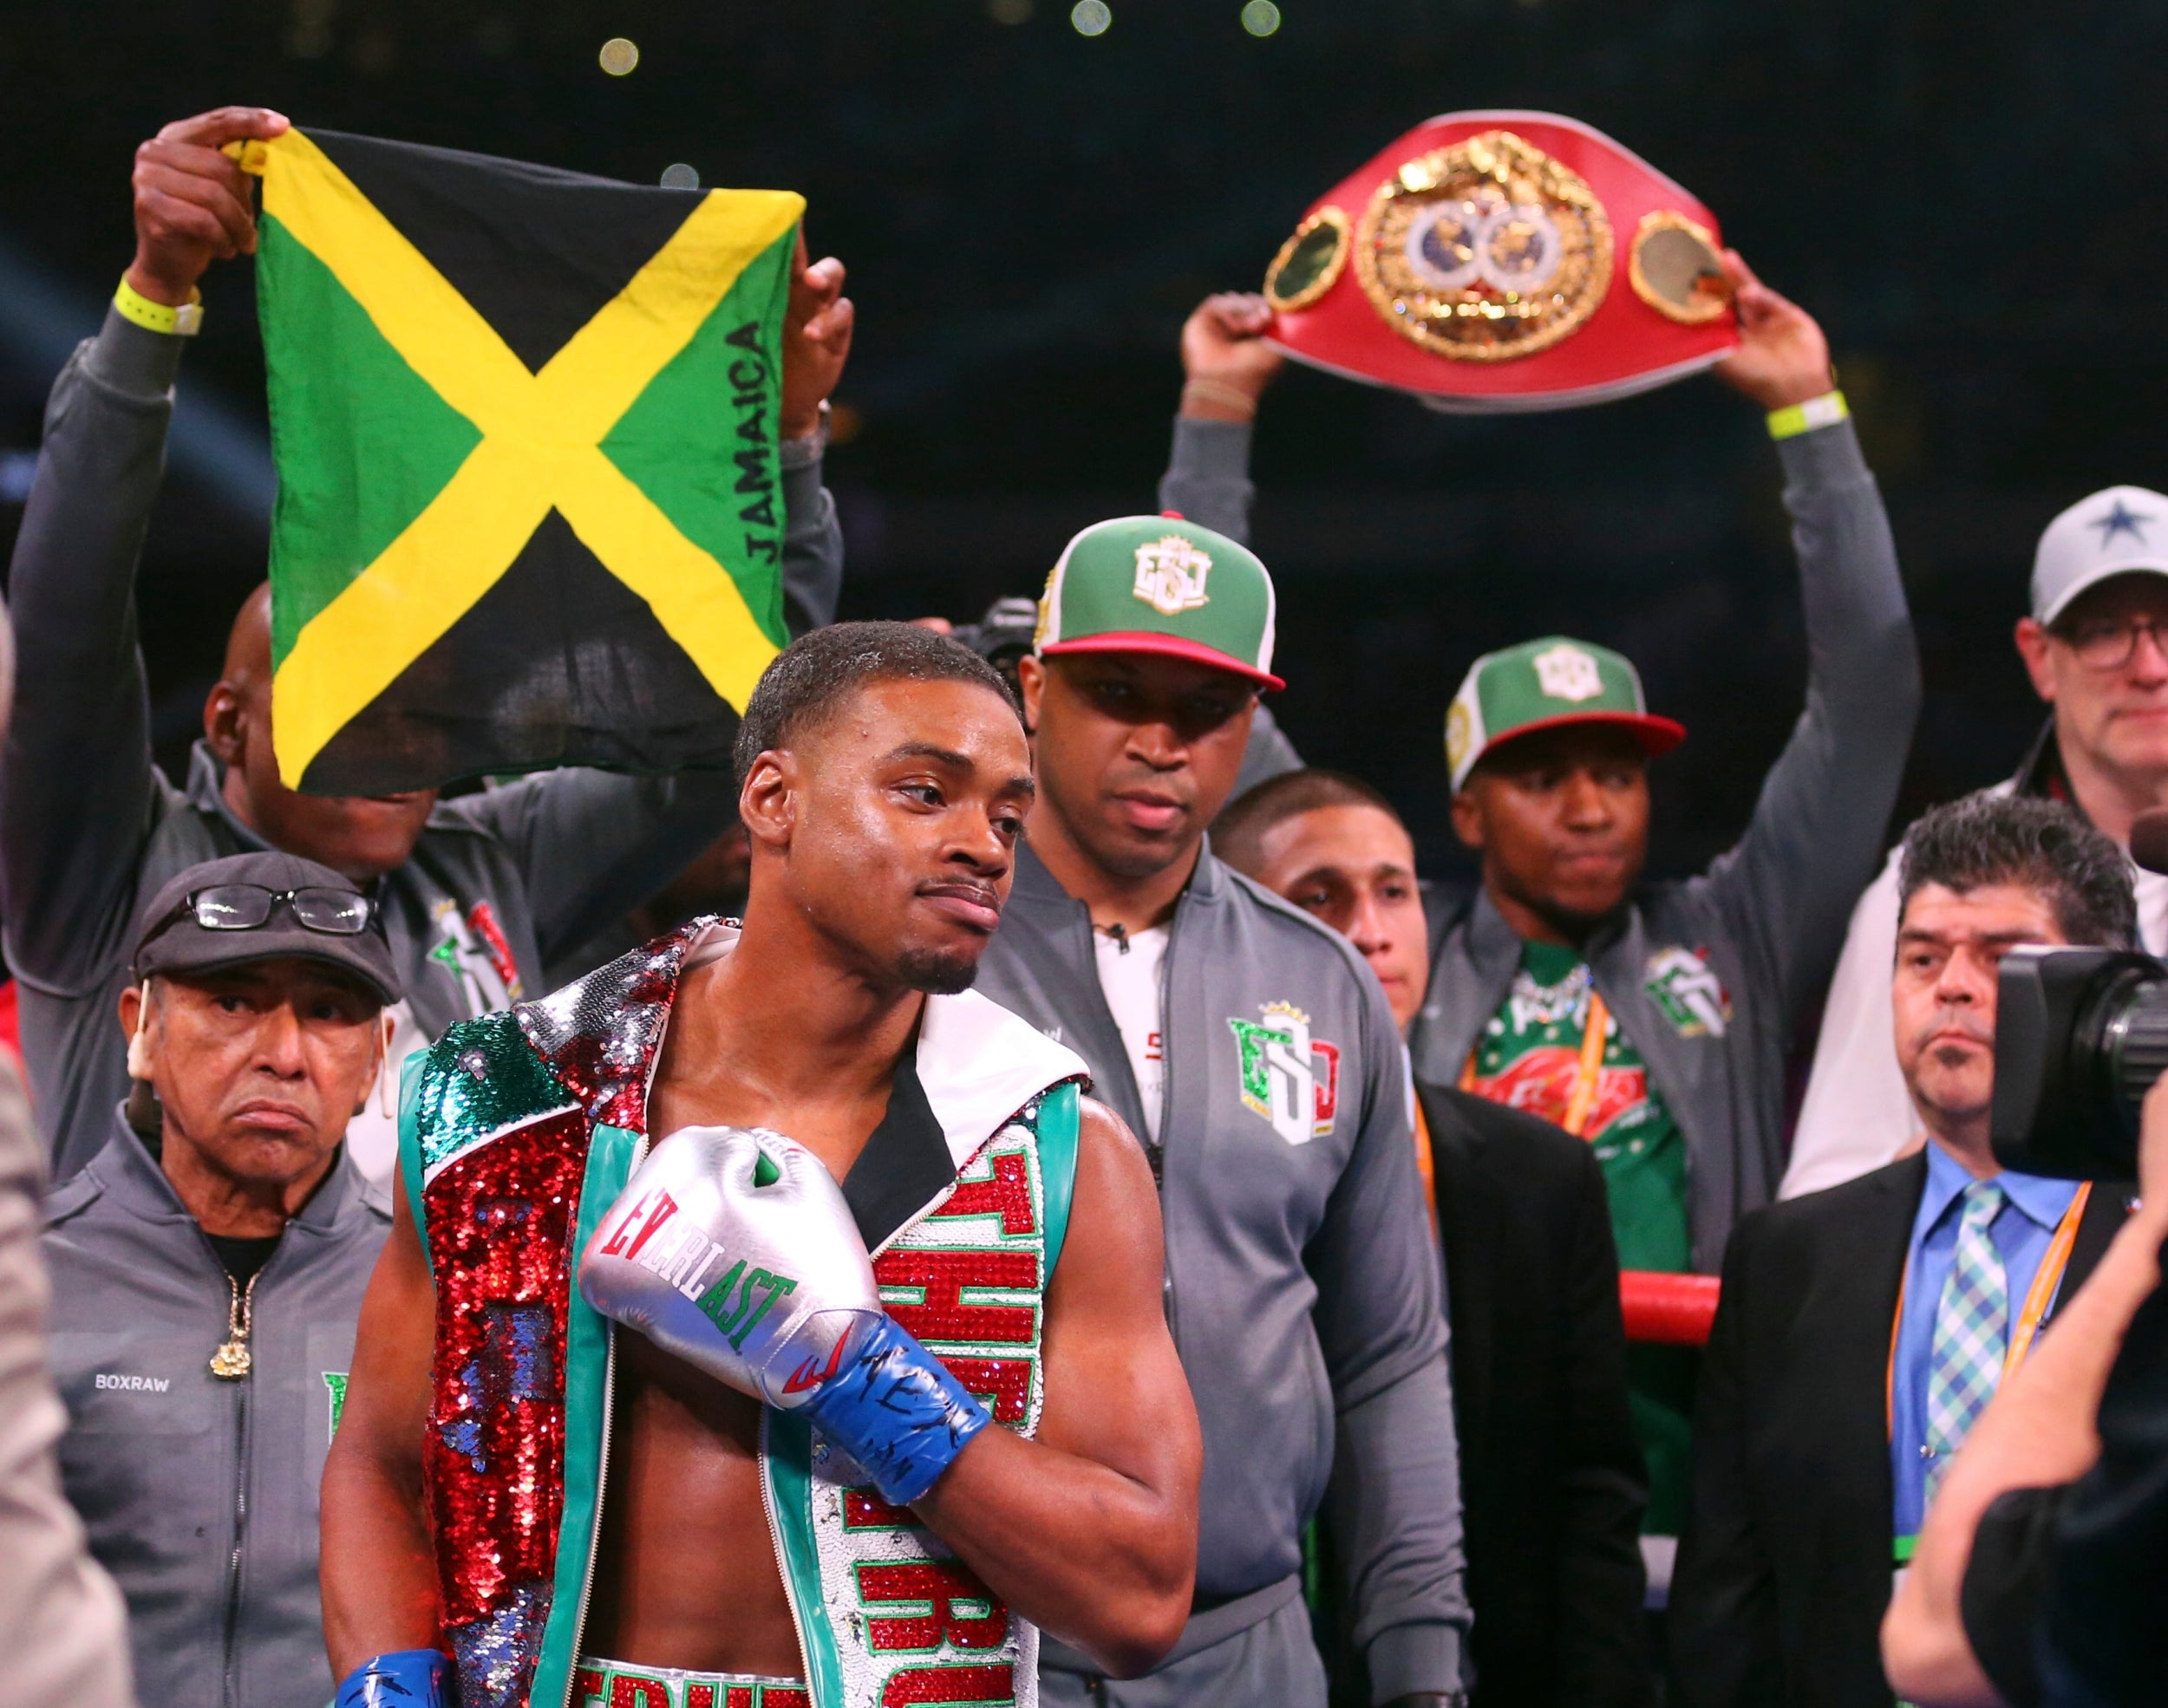 Errol Spence vs Shawn Porter fight - LIVE: Stream, UK start time, latest updates, how to watch online and TV info